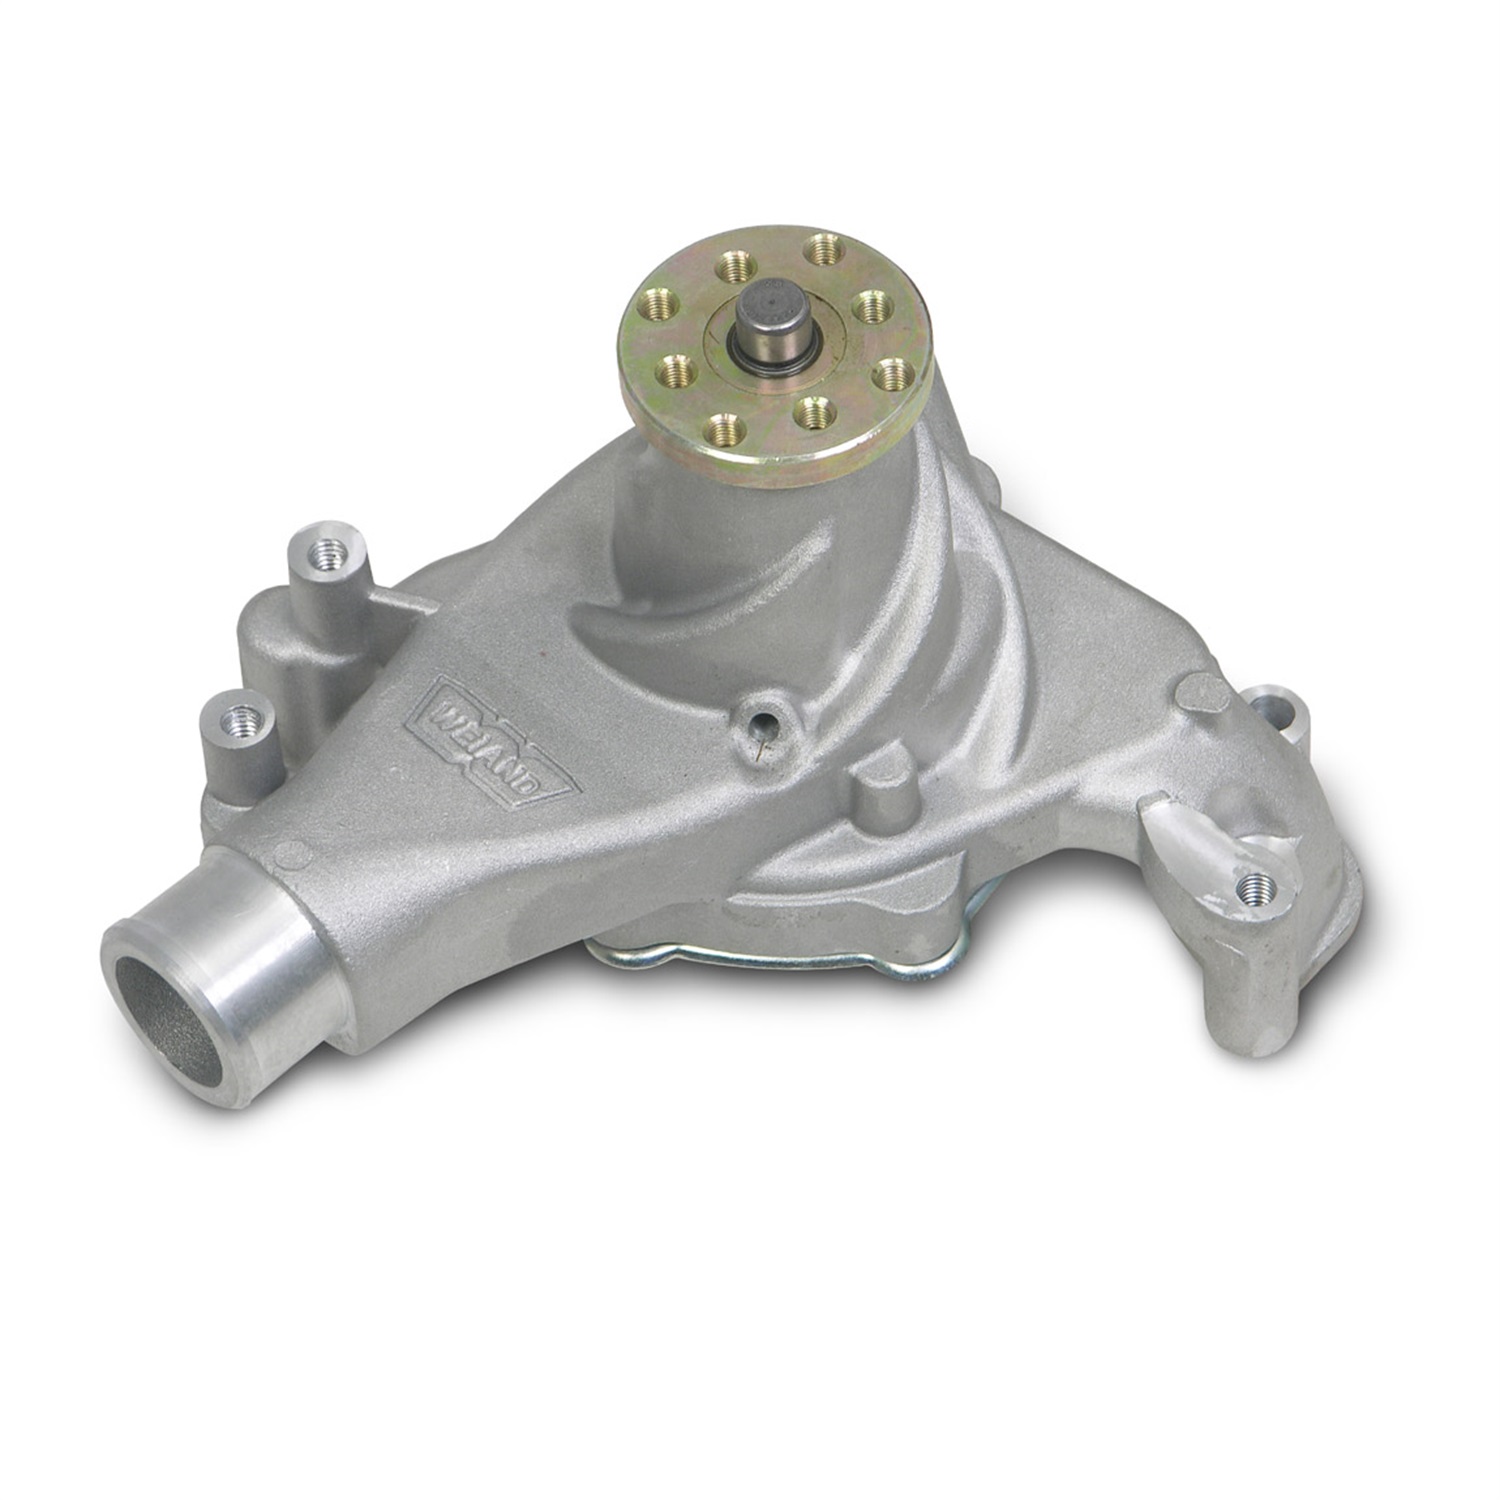 Weiand Weiand 9240 Action +Plus; Water Pump